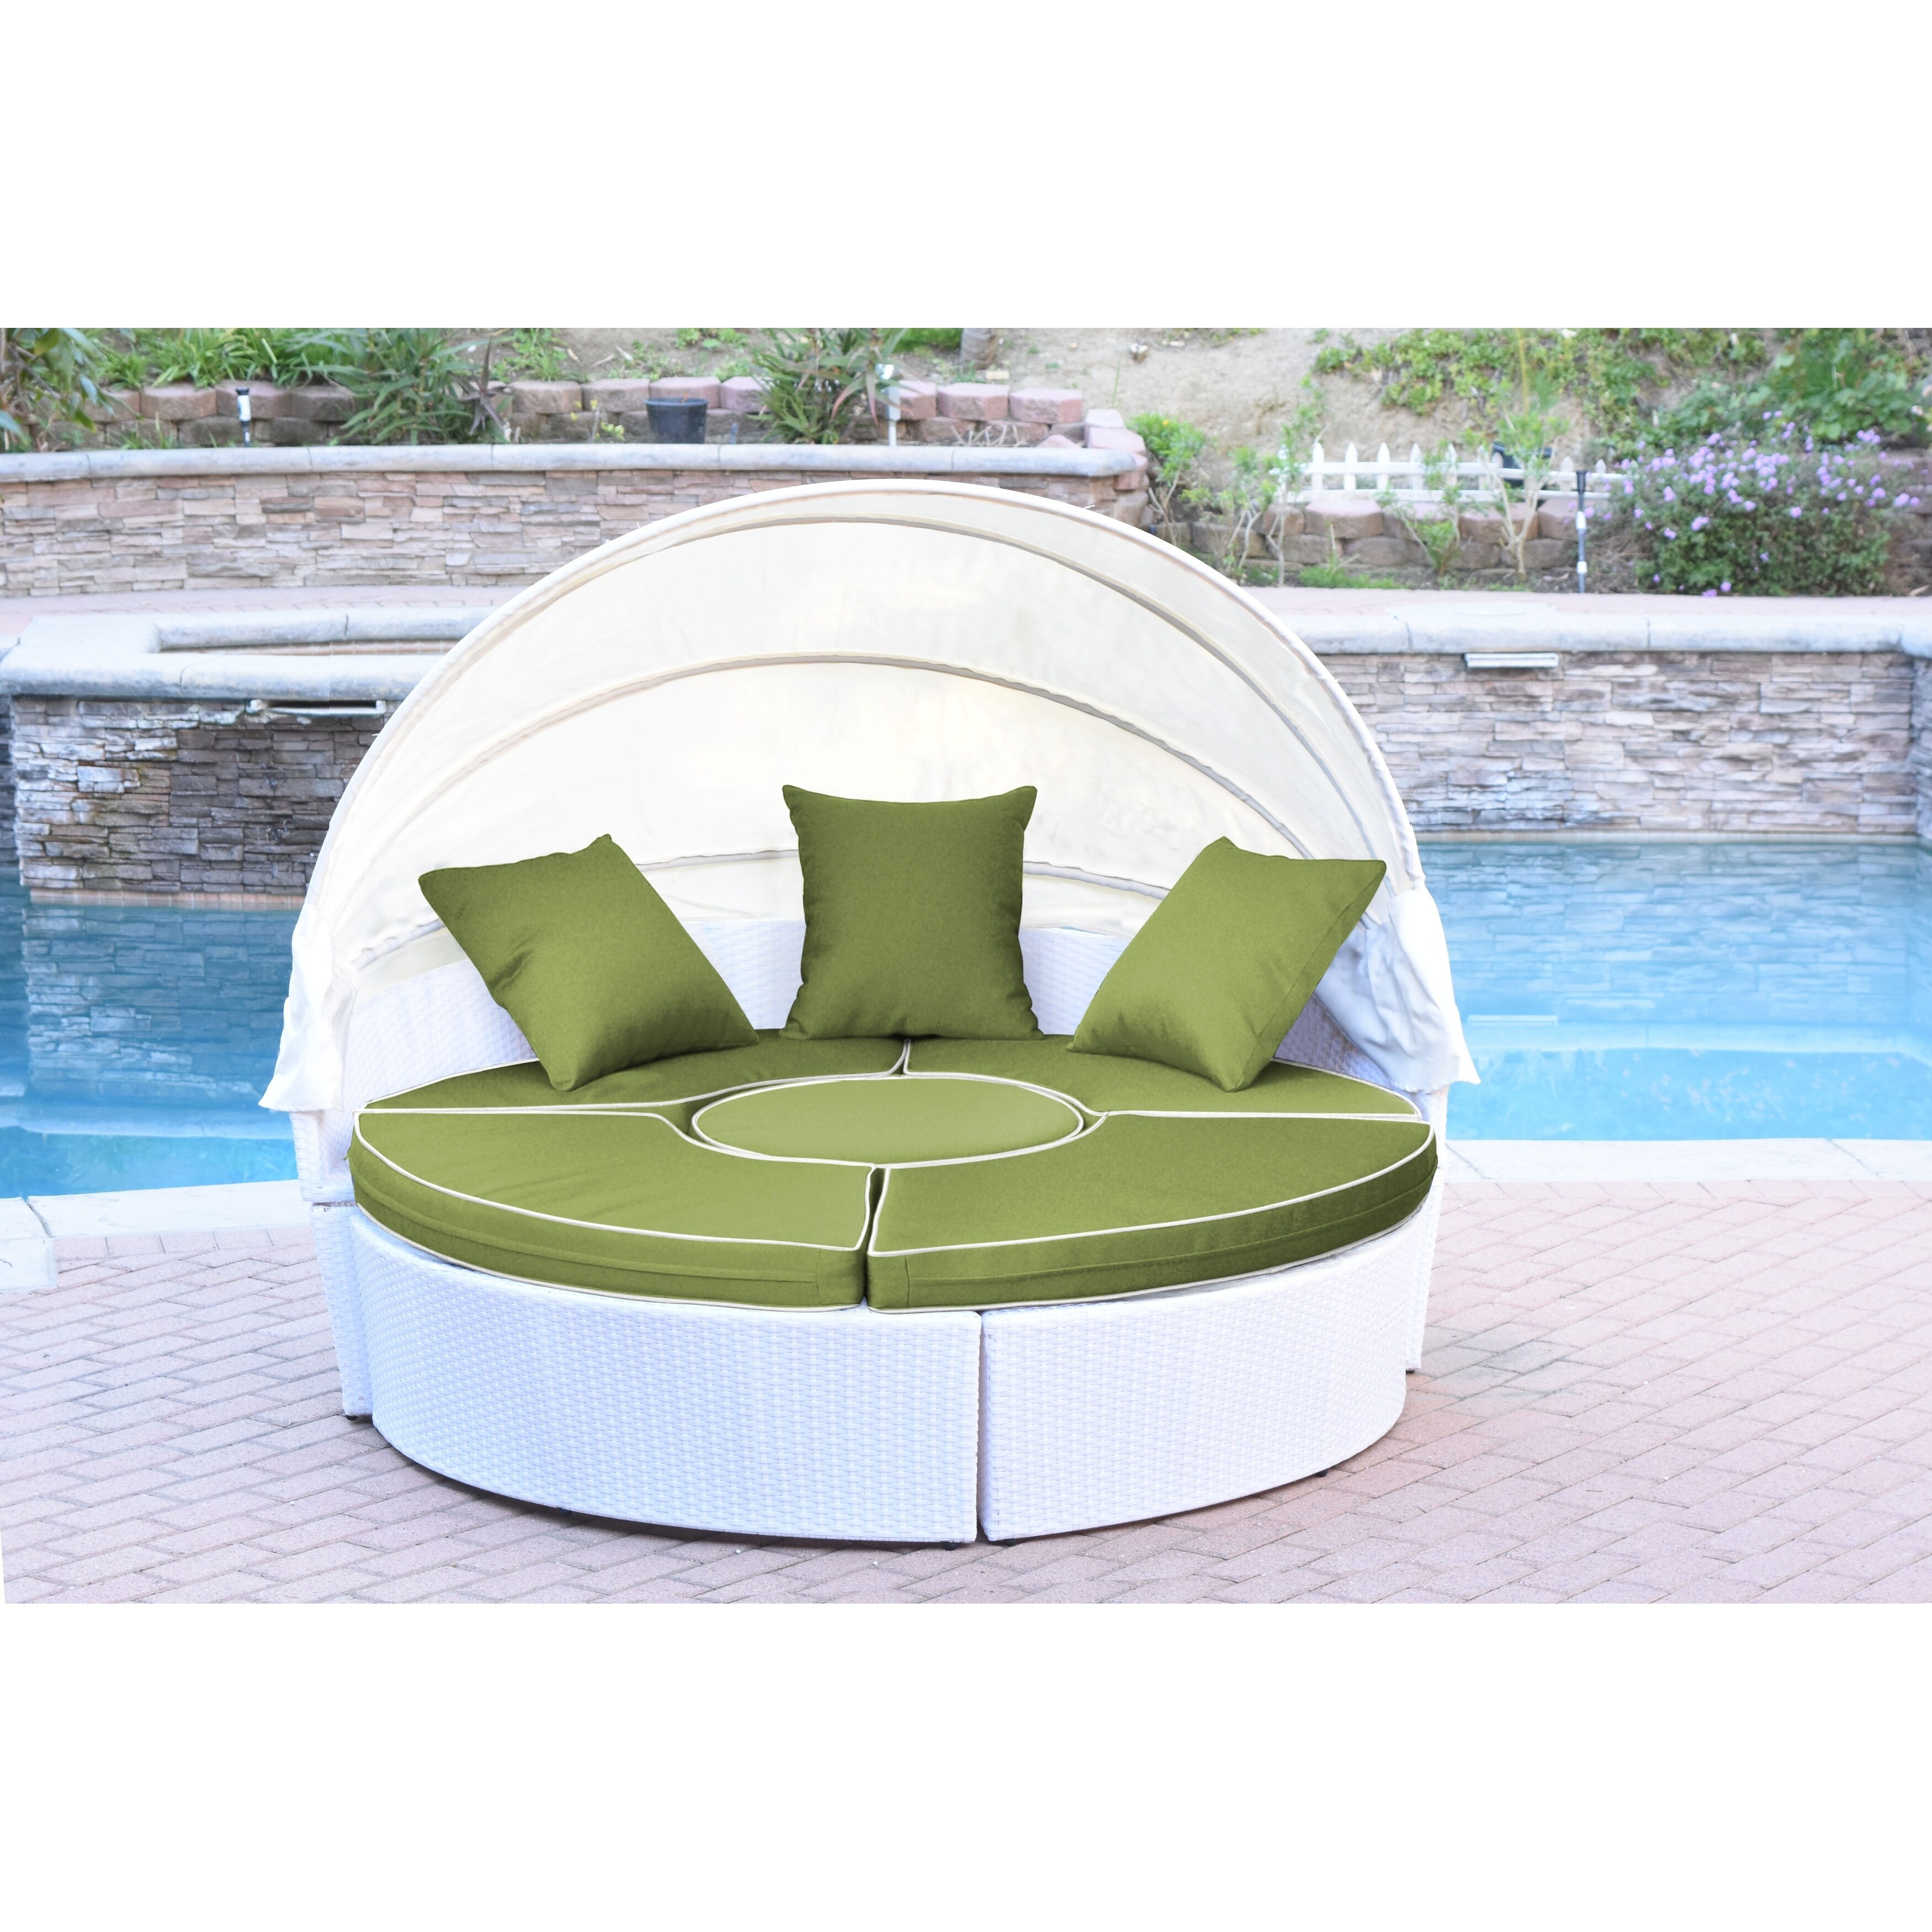 All-weather White Wicker Sectional Daybed